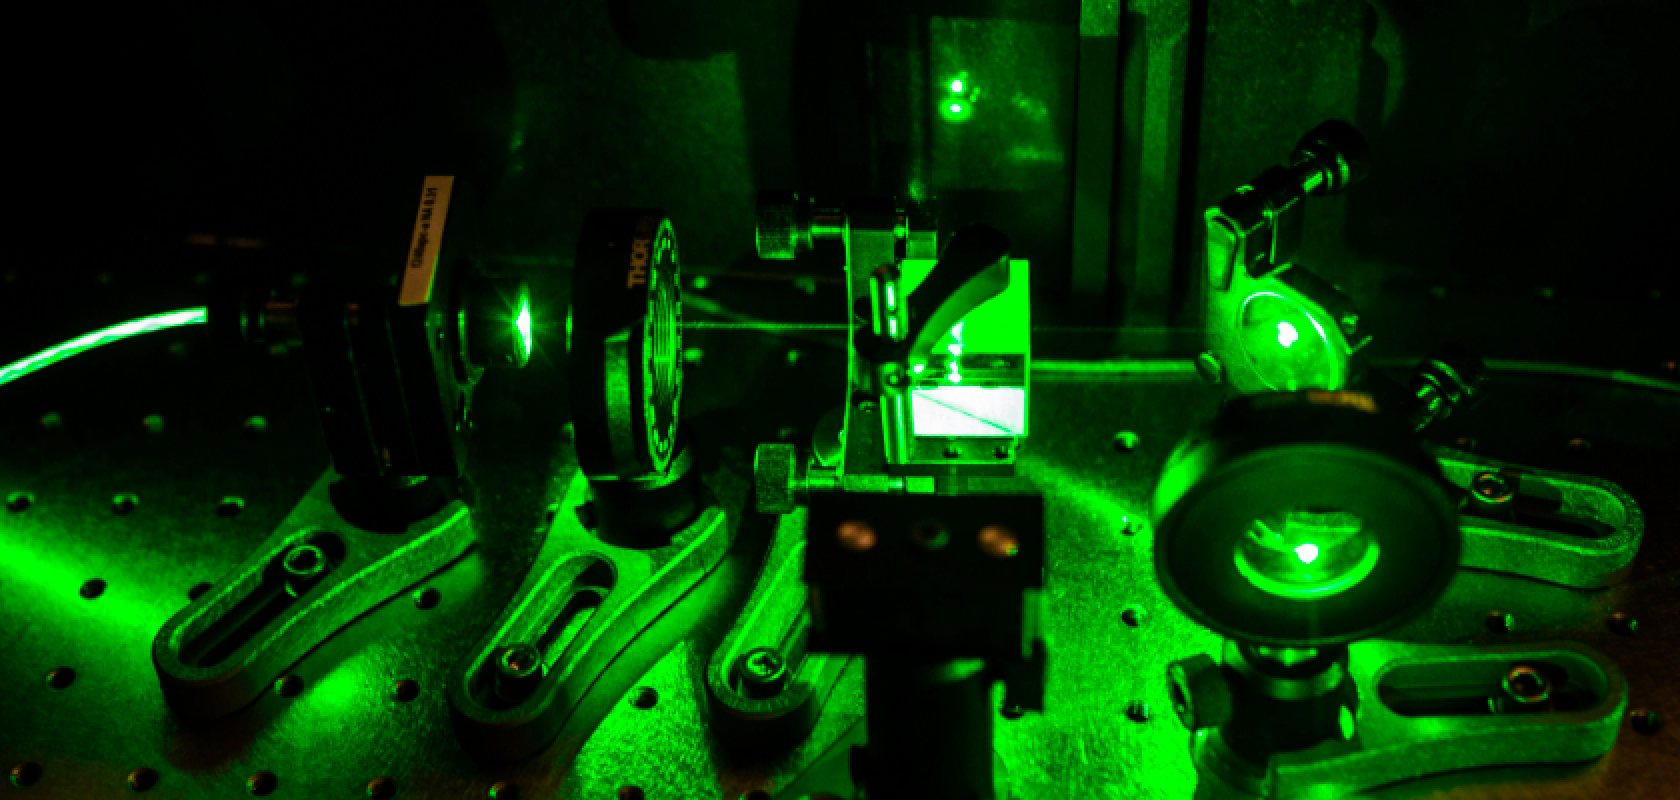 The quantum sensing technology takes inspiration from the human vision system (Image: MIT News)